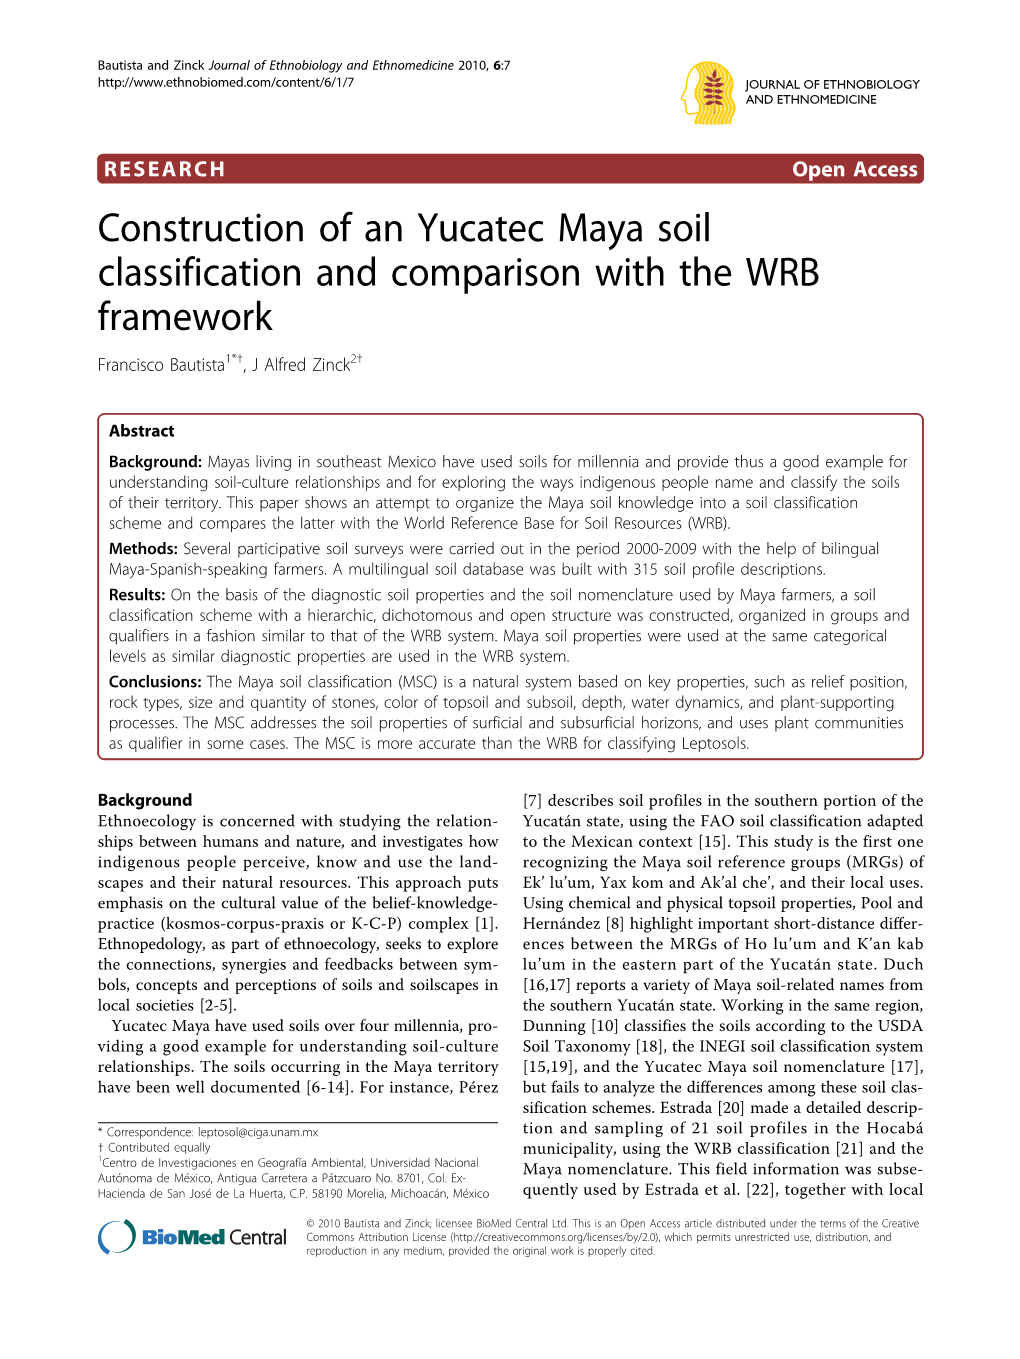 Construction of an Yucatec Maya Soil Classification and Comparison with the WRB Framework Francisco Bautista1*†, J Alfred Zinck2†